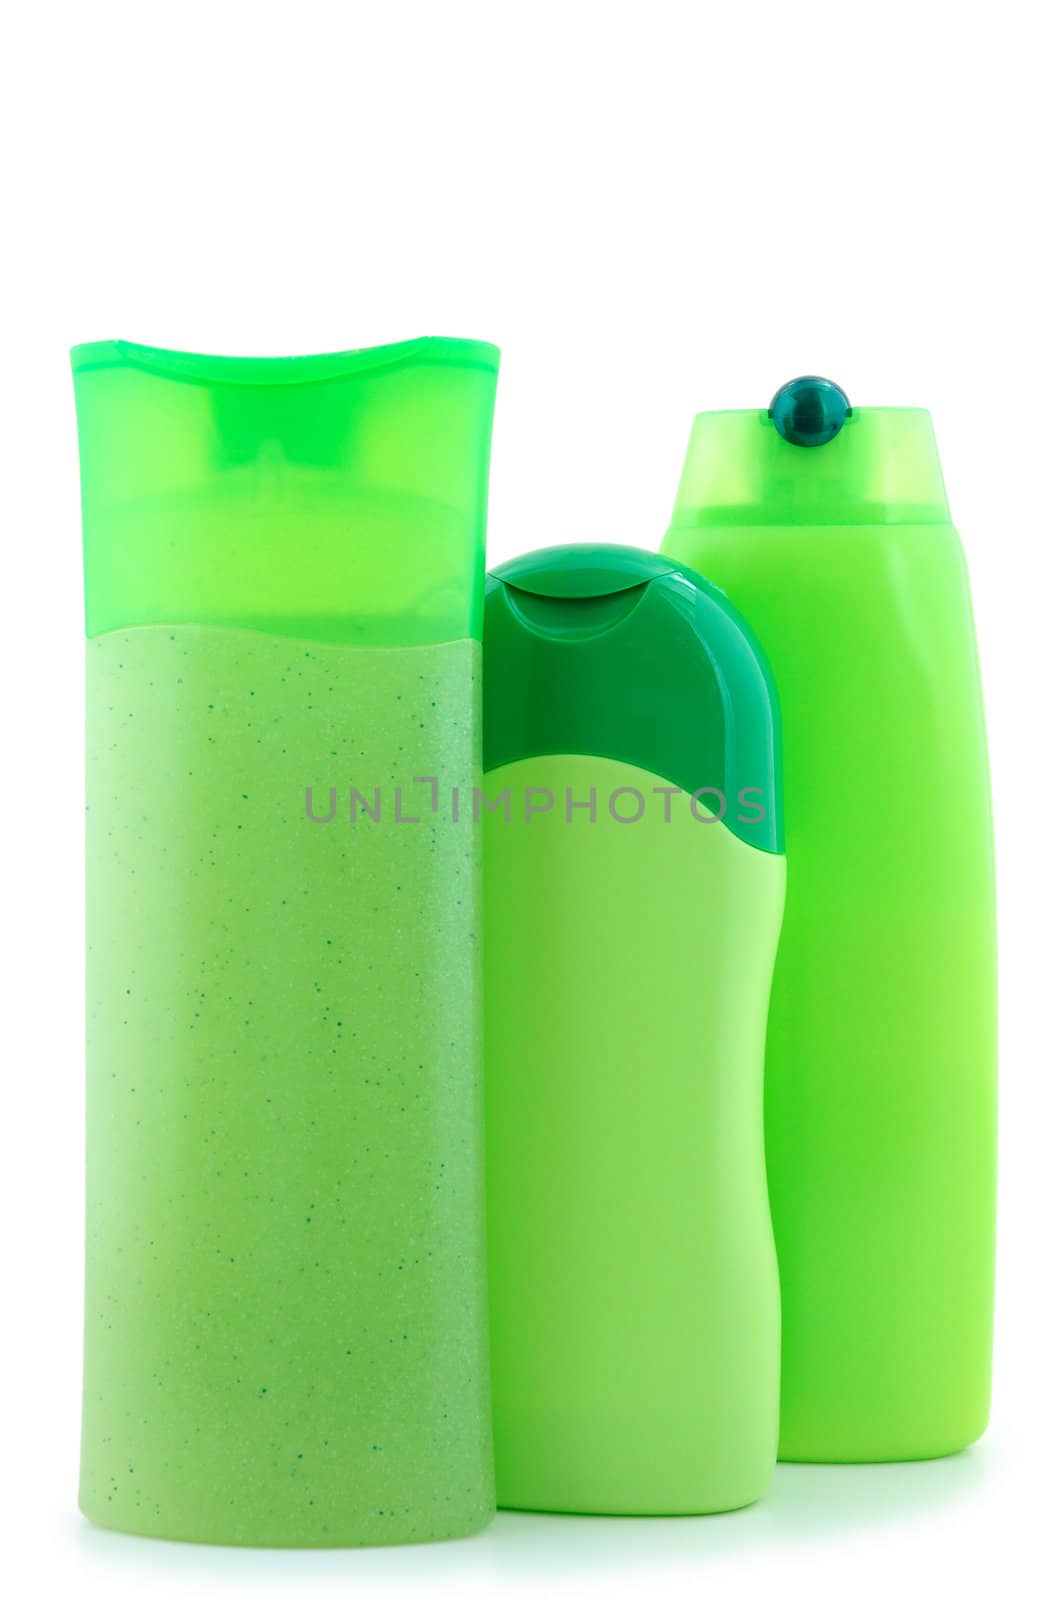 Three different  green beauty and hygiene products. On overwhite background.